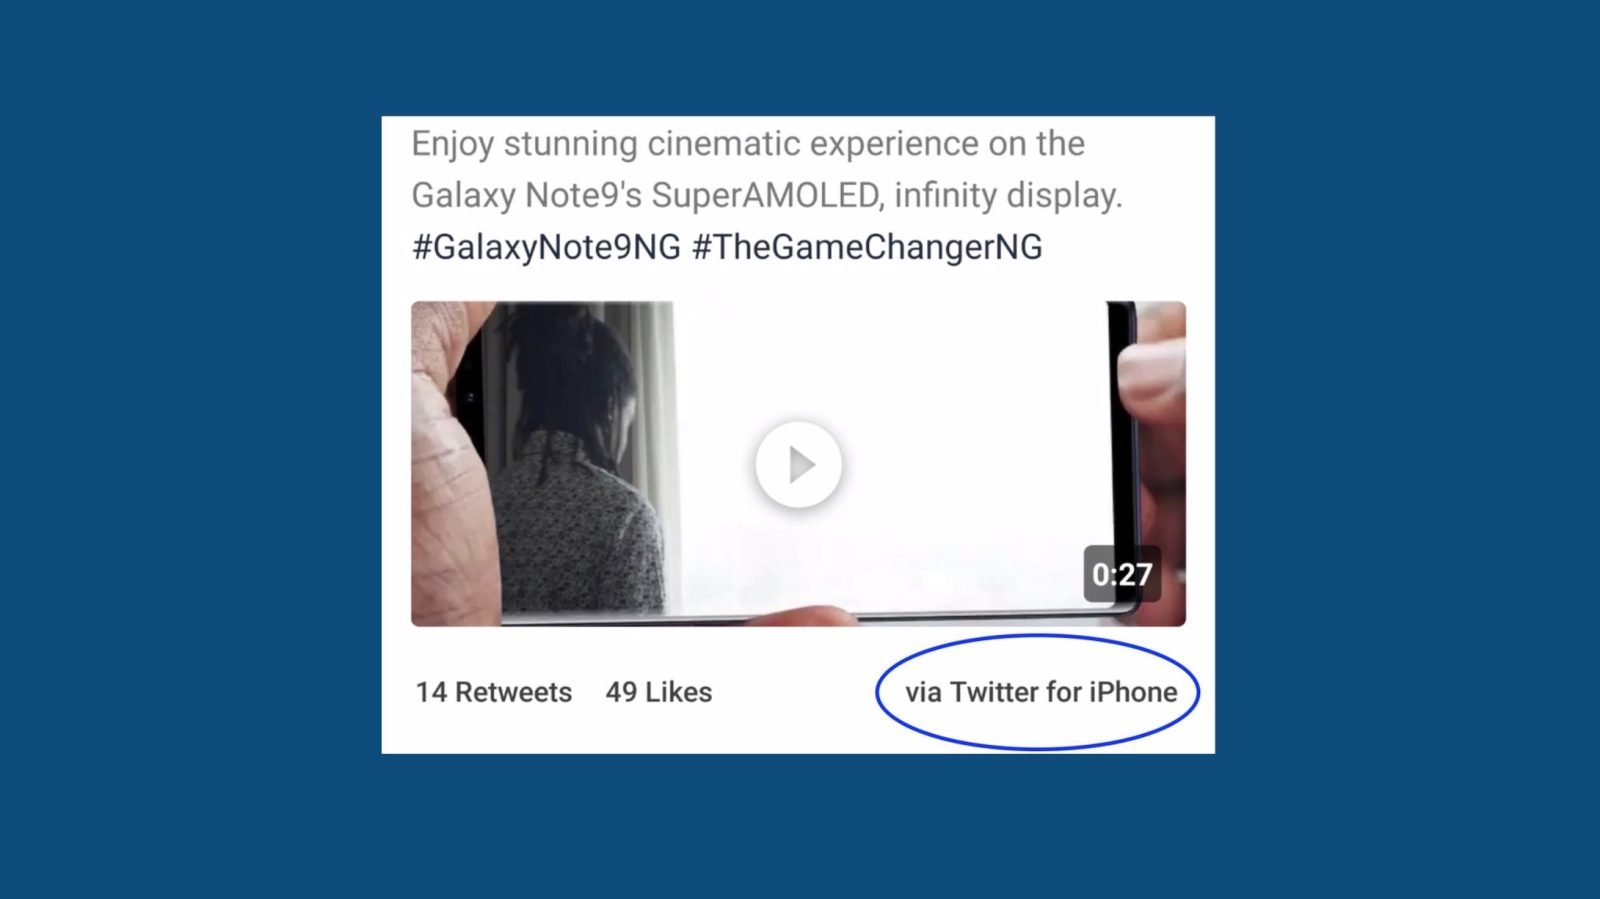 Samsung Posted Galaxy Note 9 Promotion on Twitter from iPhone